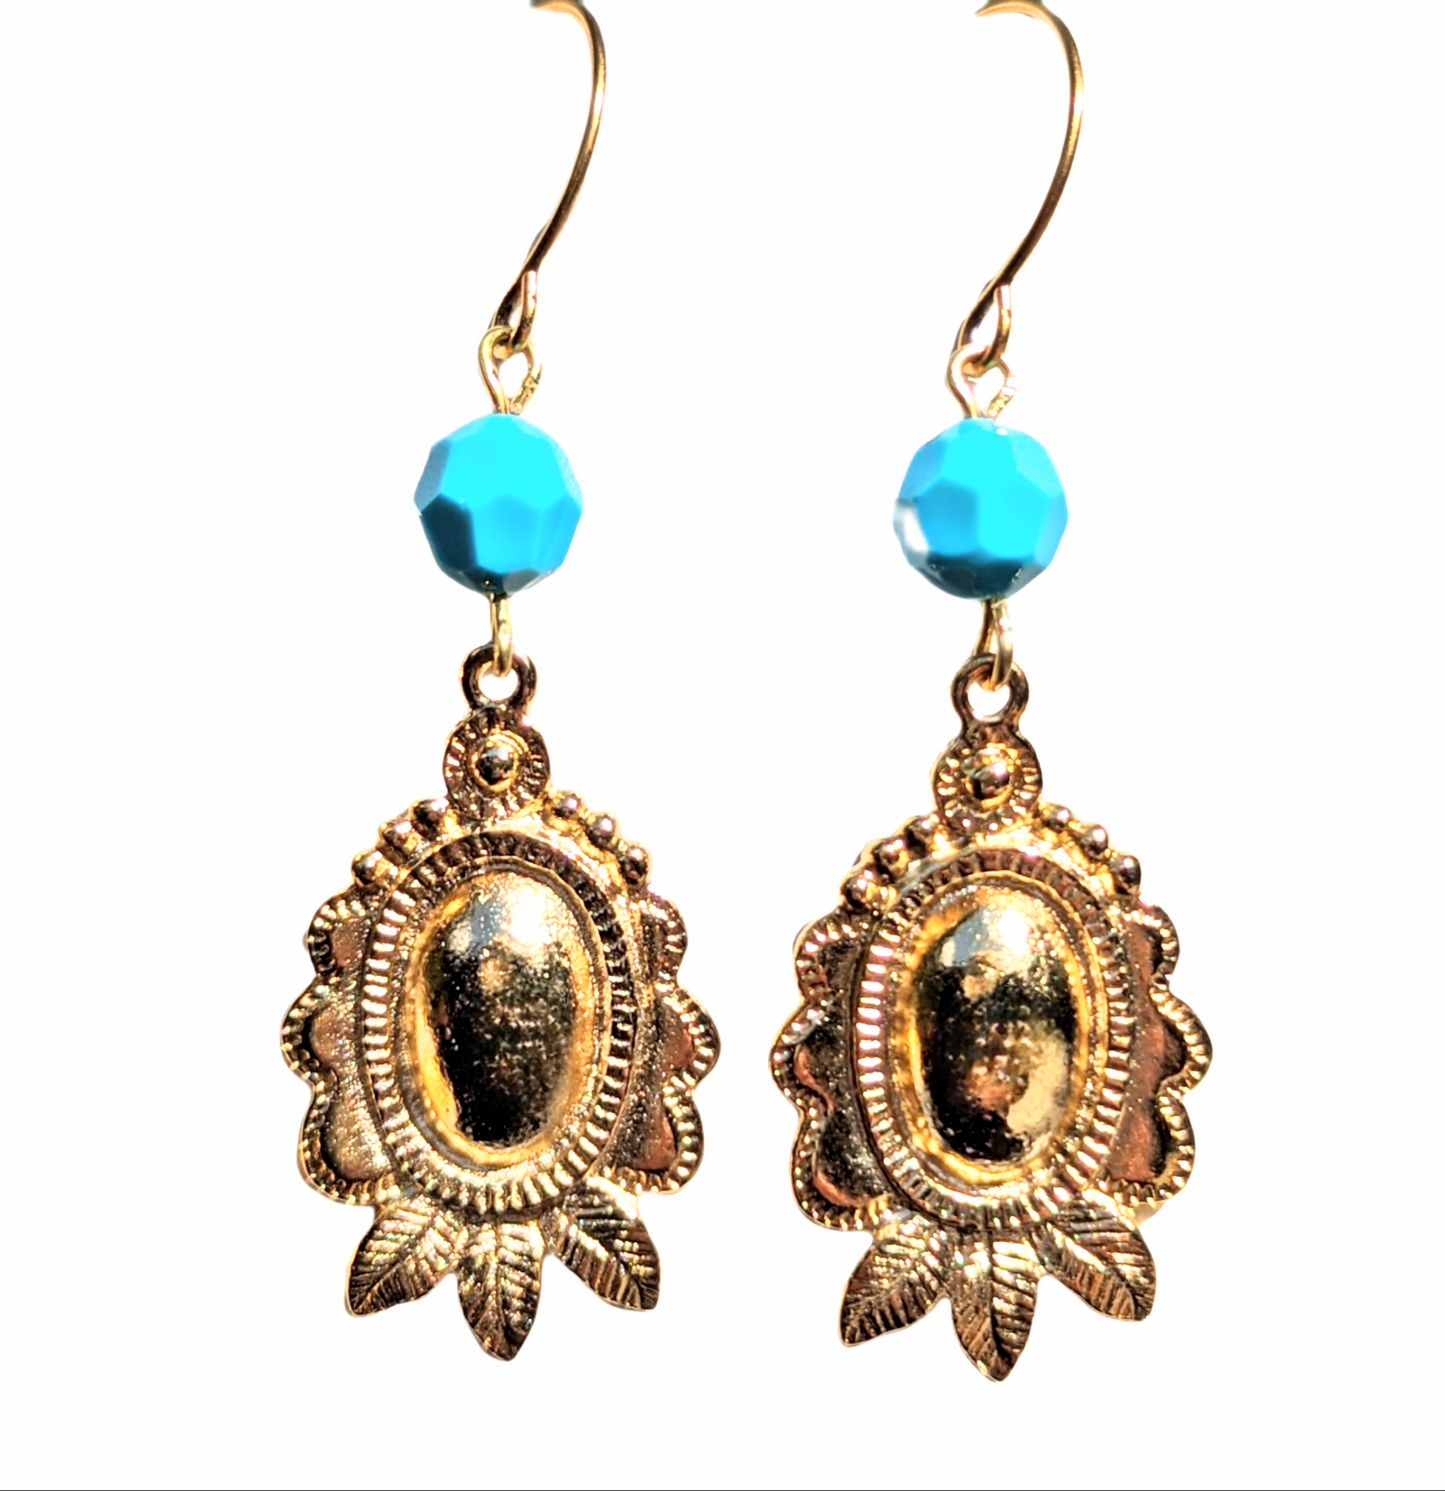 Gold Plated Earrings Swarovski Turquoise 2.1 inch Long USA Made by Sugar Gay Isber unisex-adult